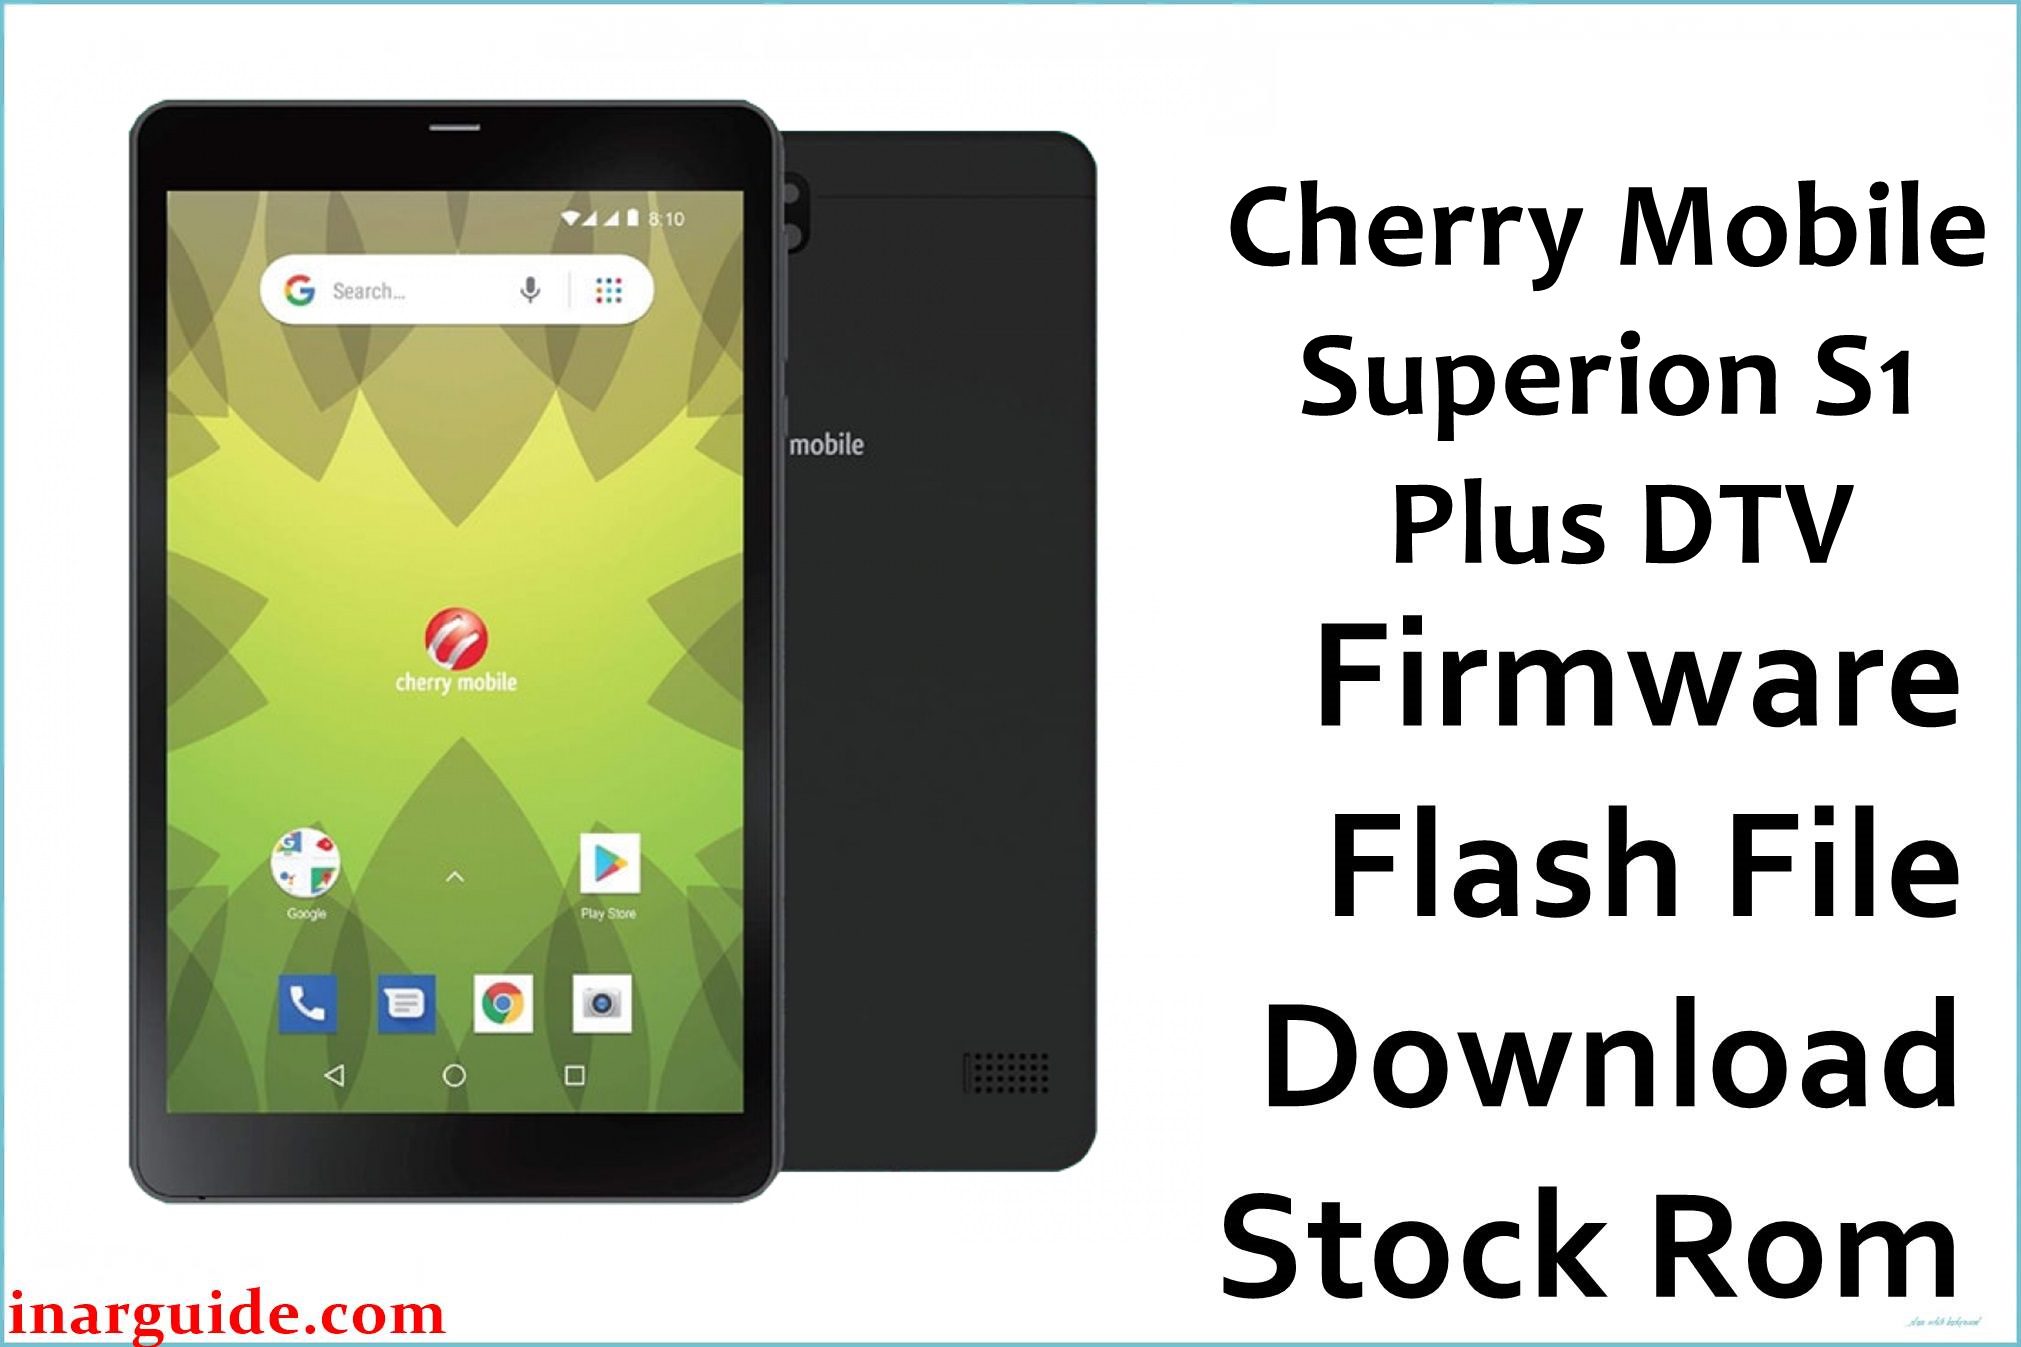 Cherry Mobile Superion S1 Plus DTV